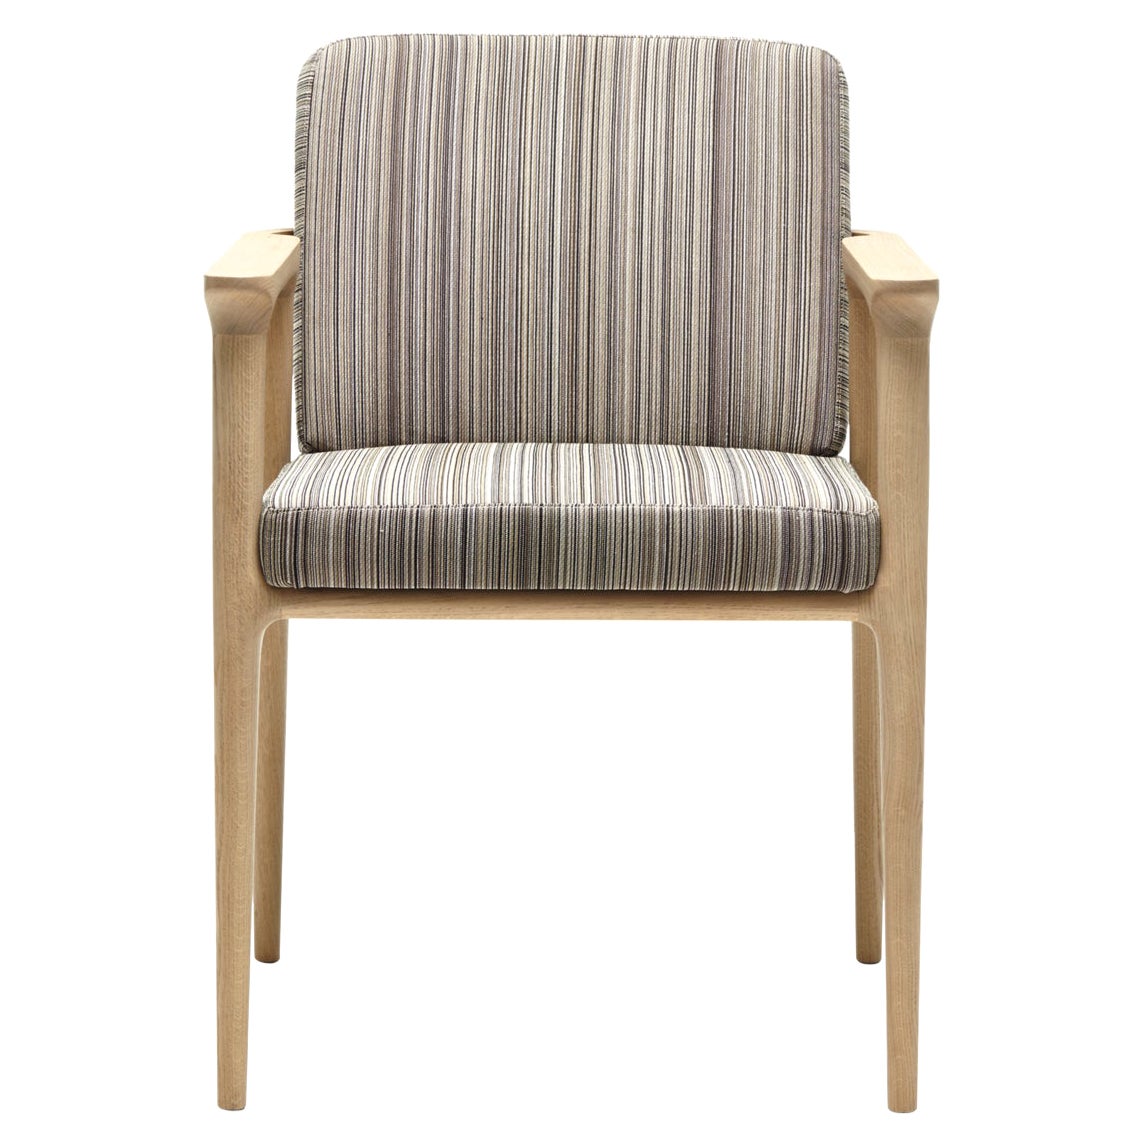 Moooi Zio Dining Chair in Manga Brown Upholstery & Oak Stained White Wash Frame